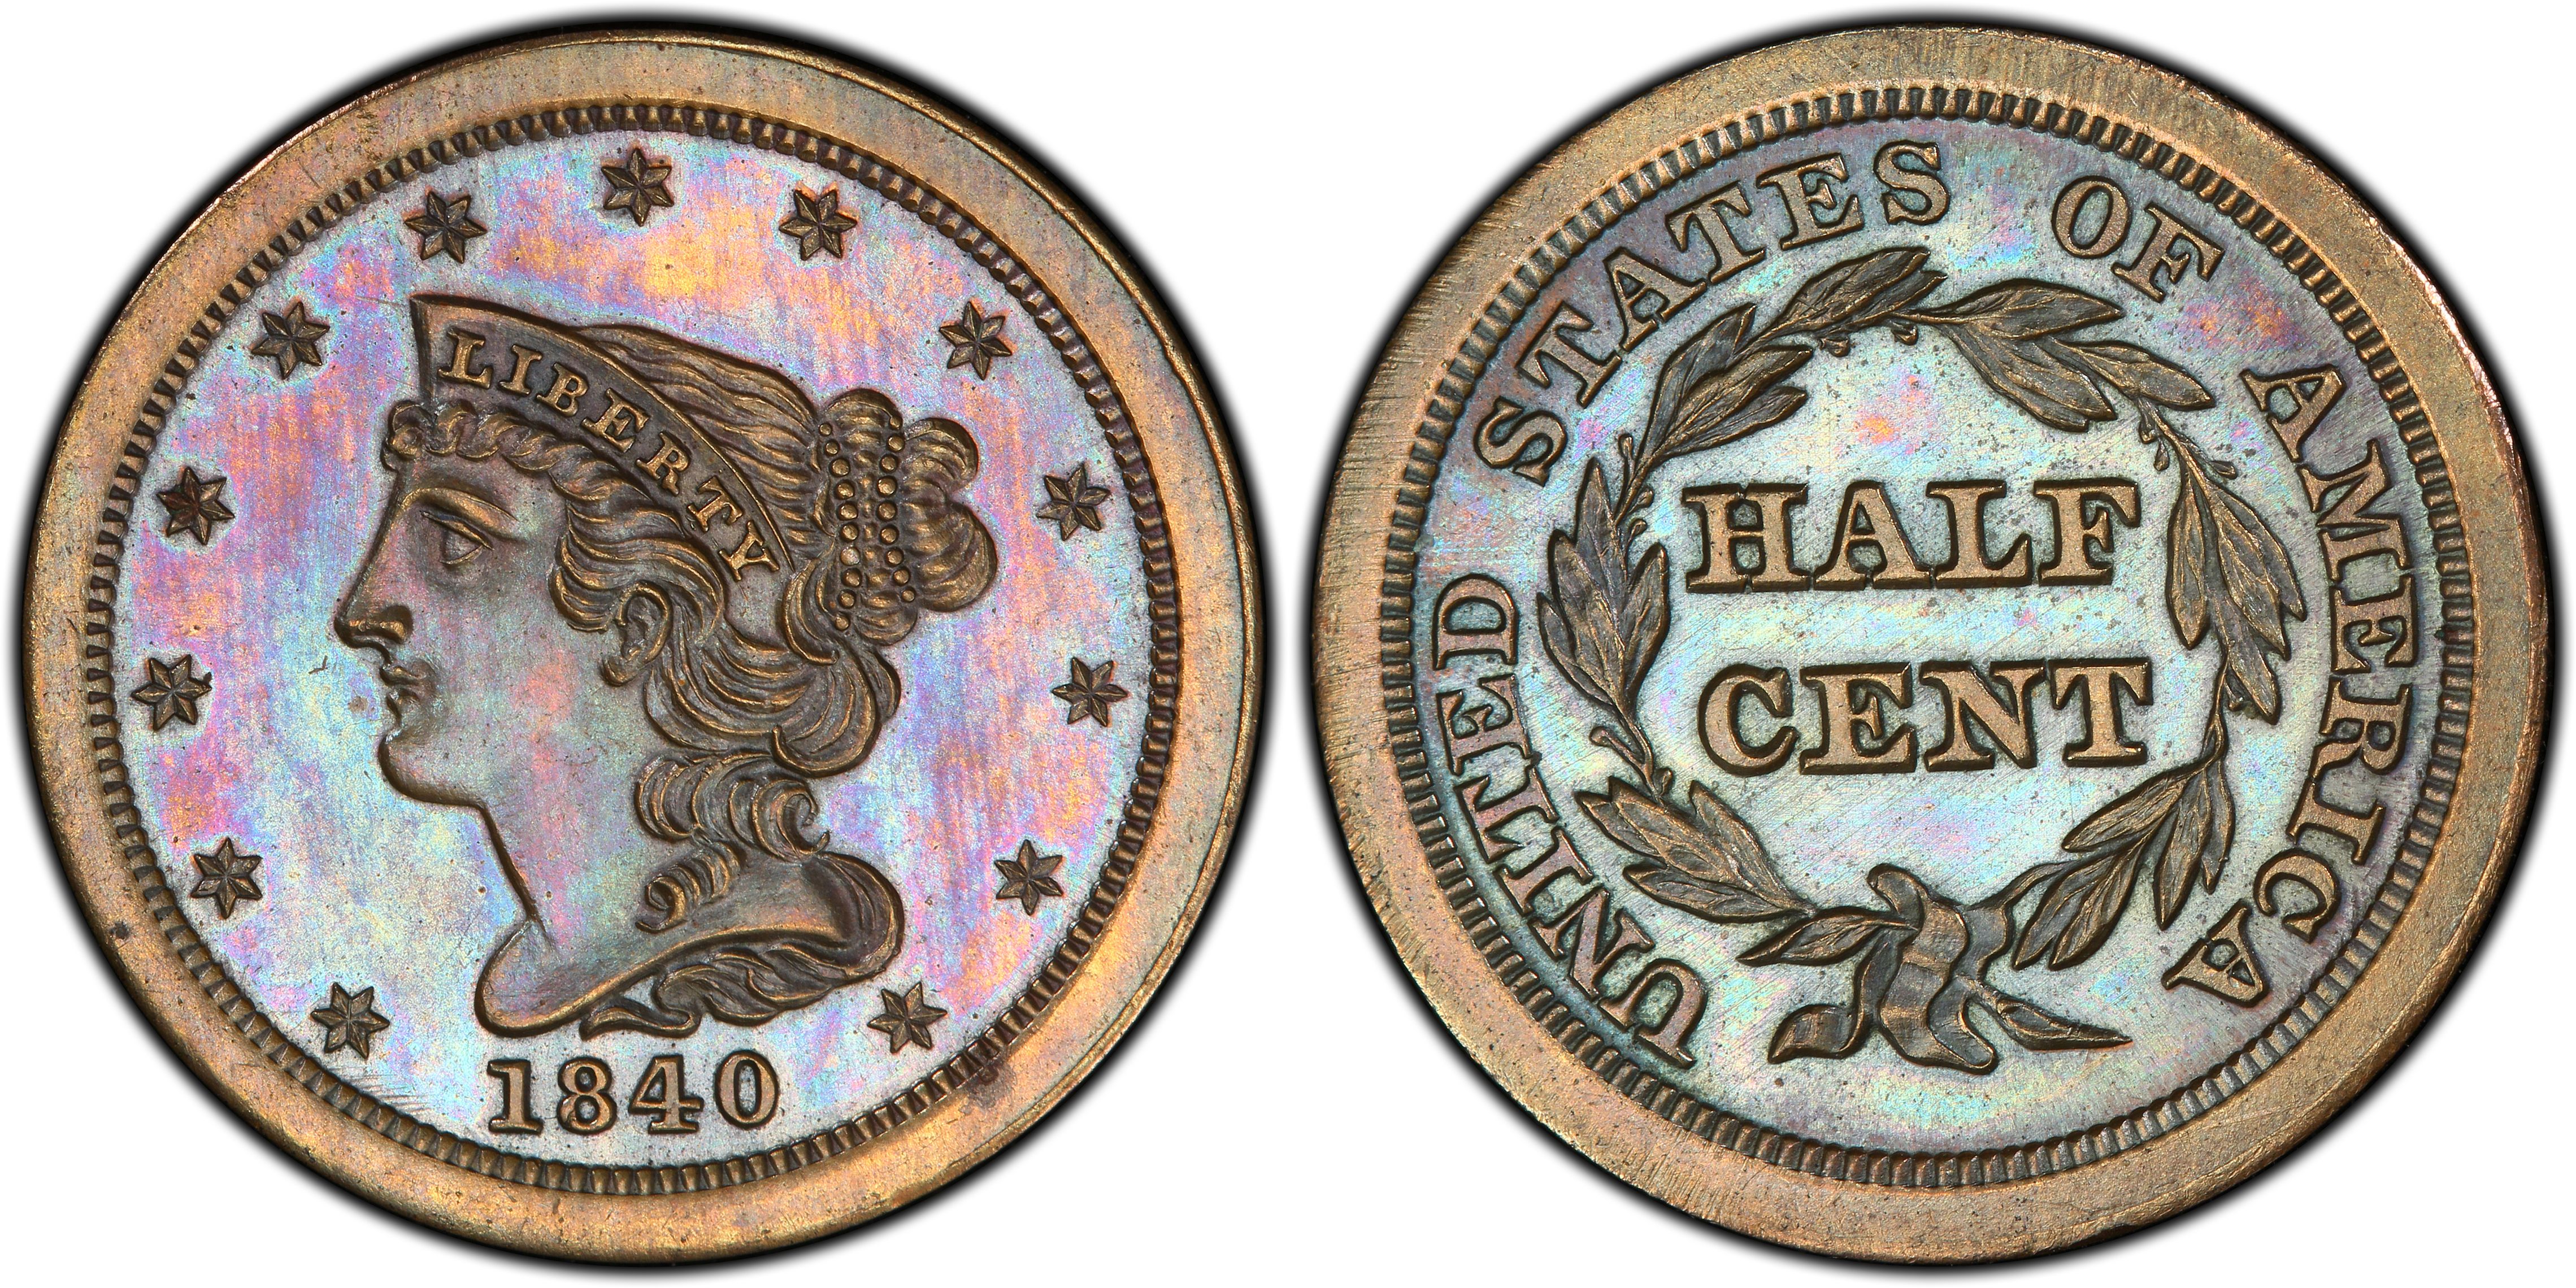 1840 1/2C Restrike, BN (Proof) Braided Hair Half Cent - PCGS CoinFacts